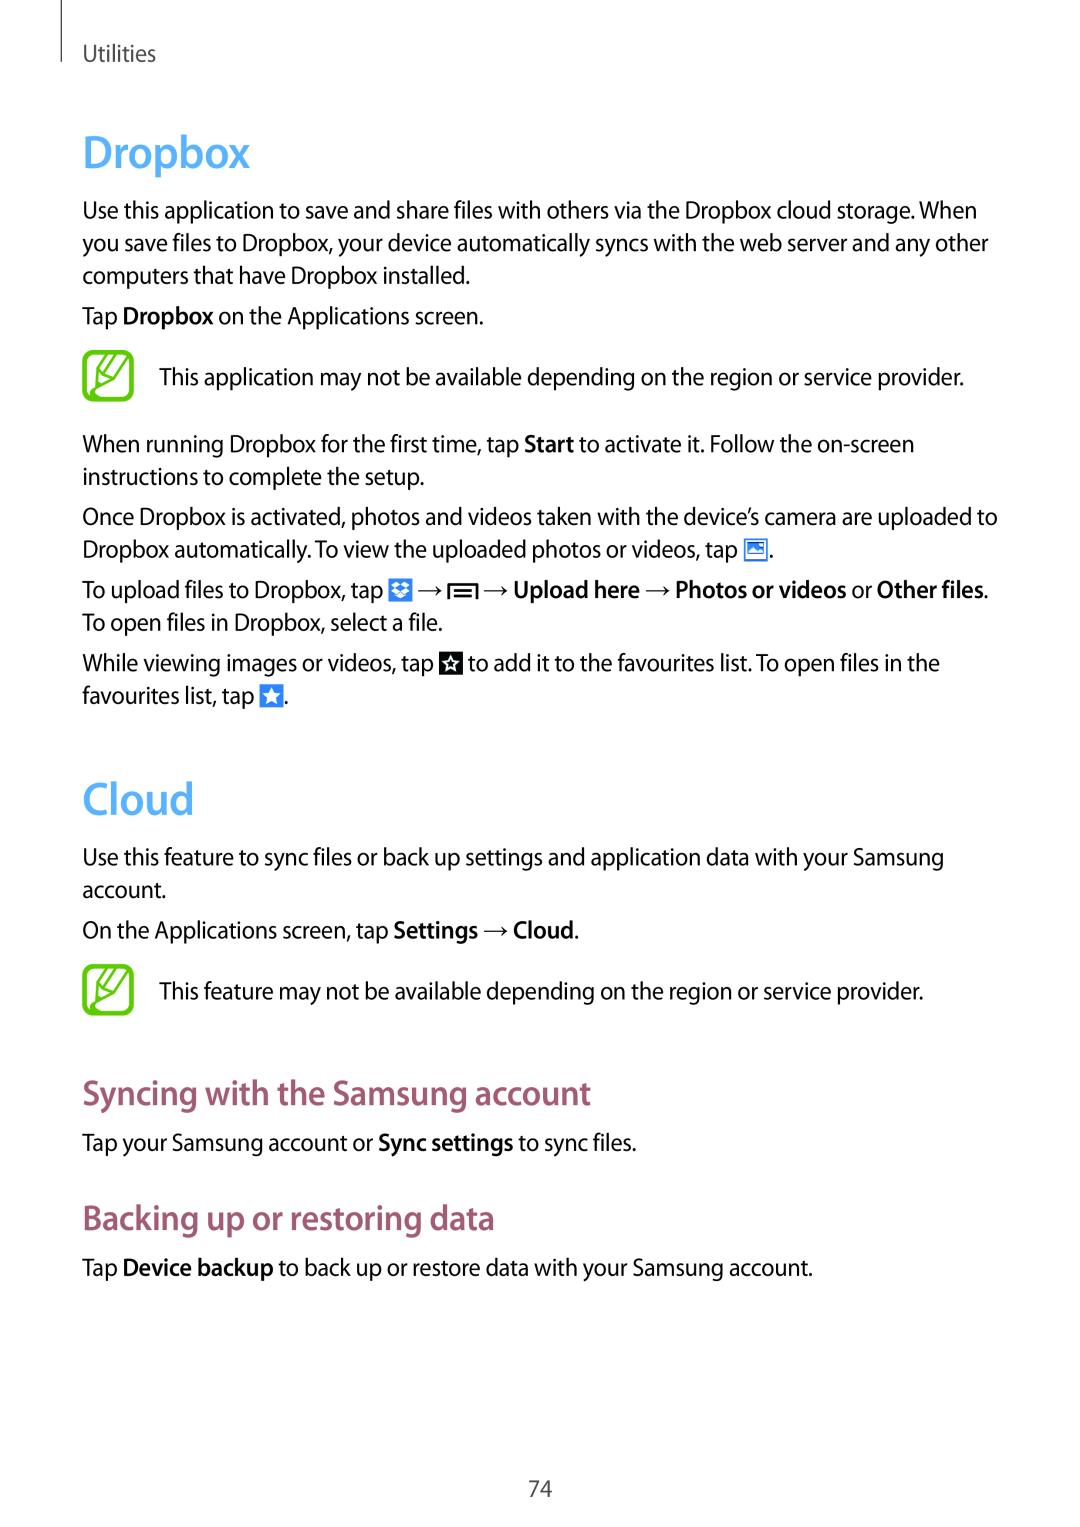 Samsung GT-S6790PWNSEB manual Dropbox, Cloud, Syncing with the Samsung account, Backing up or restoring data, Utilities 